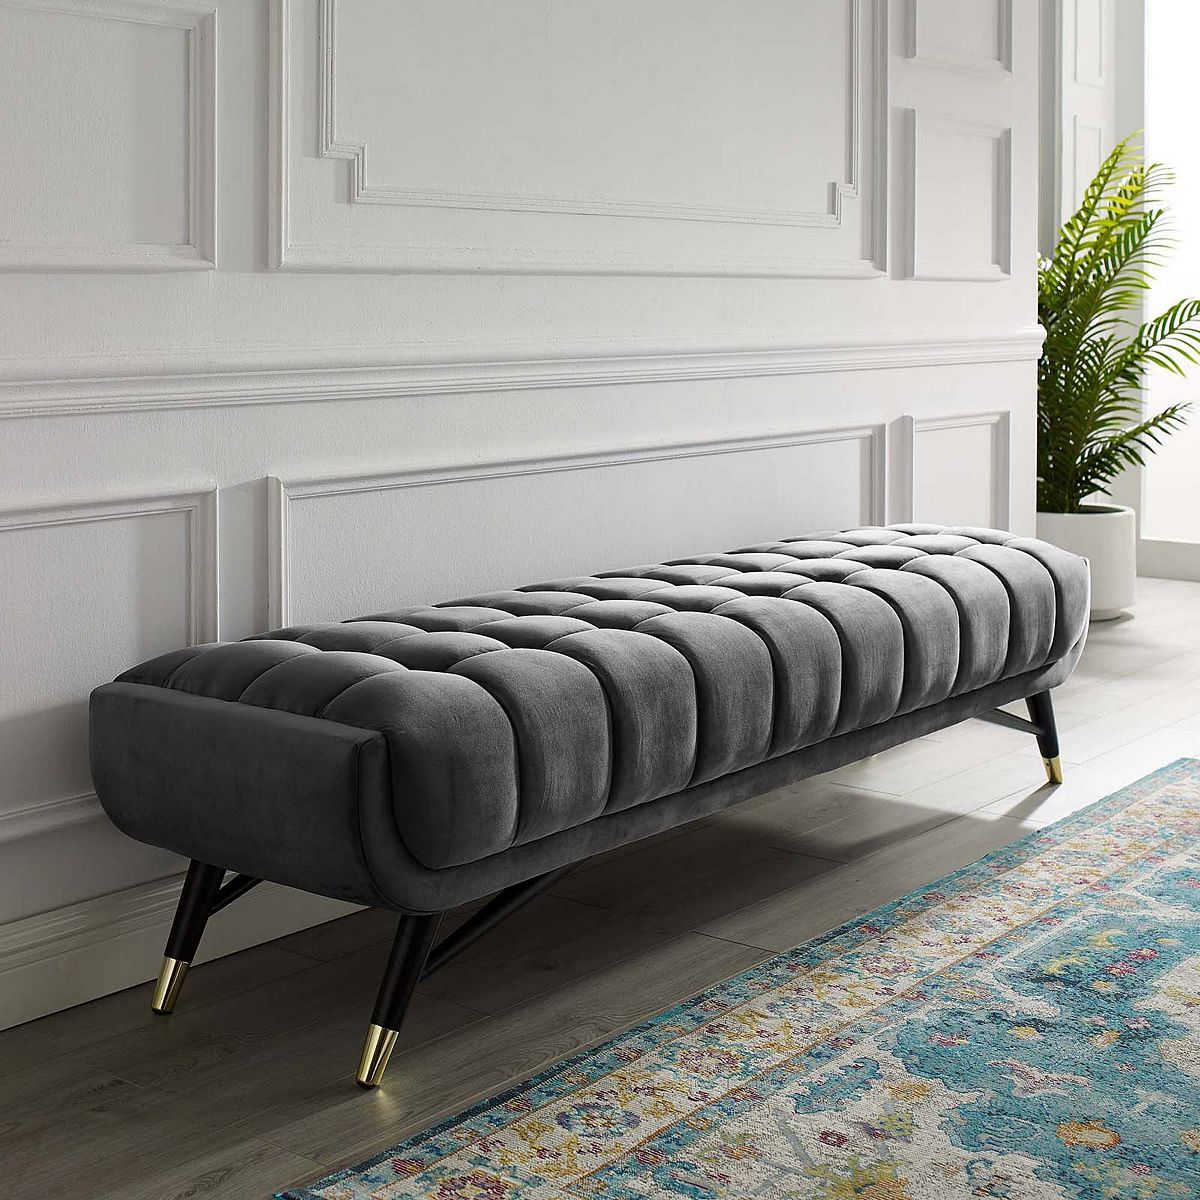 Why Every Bedroom Needs An Upholstered Bench